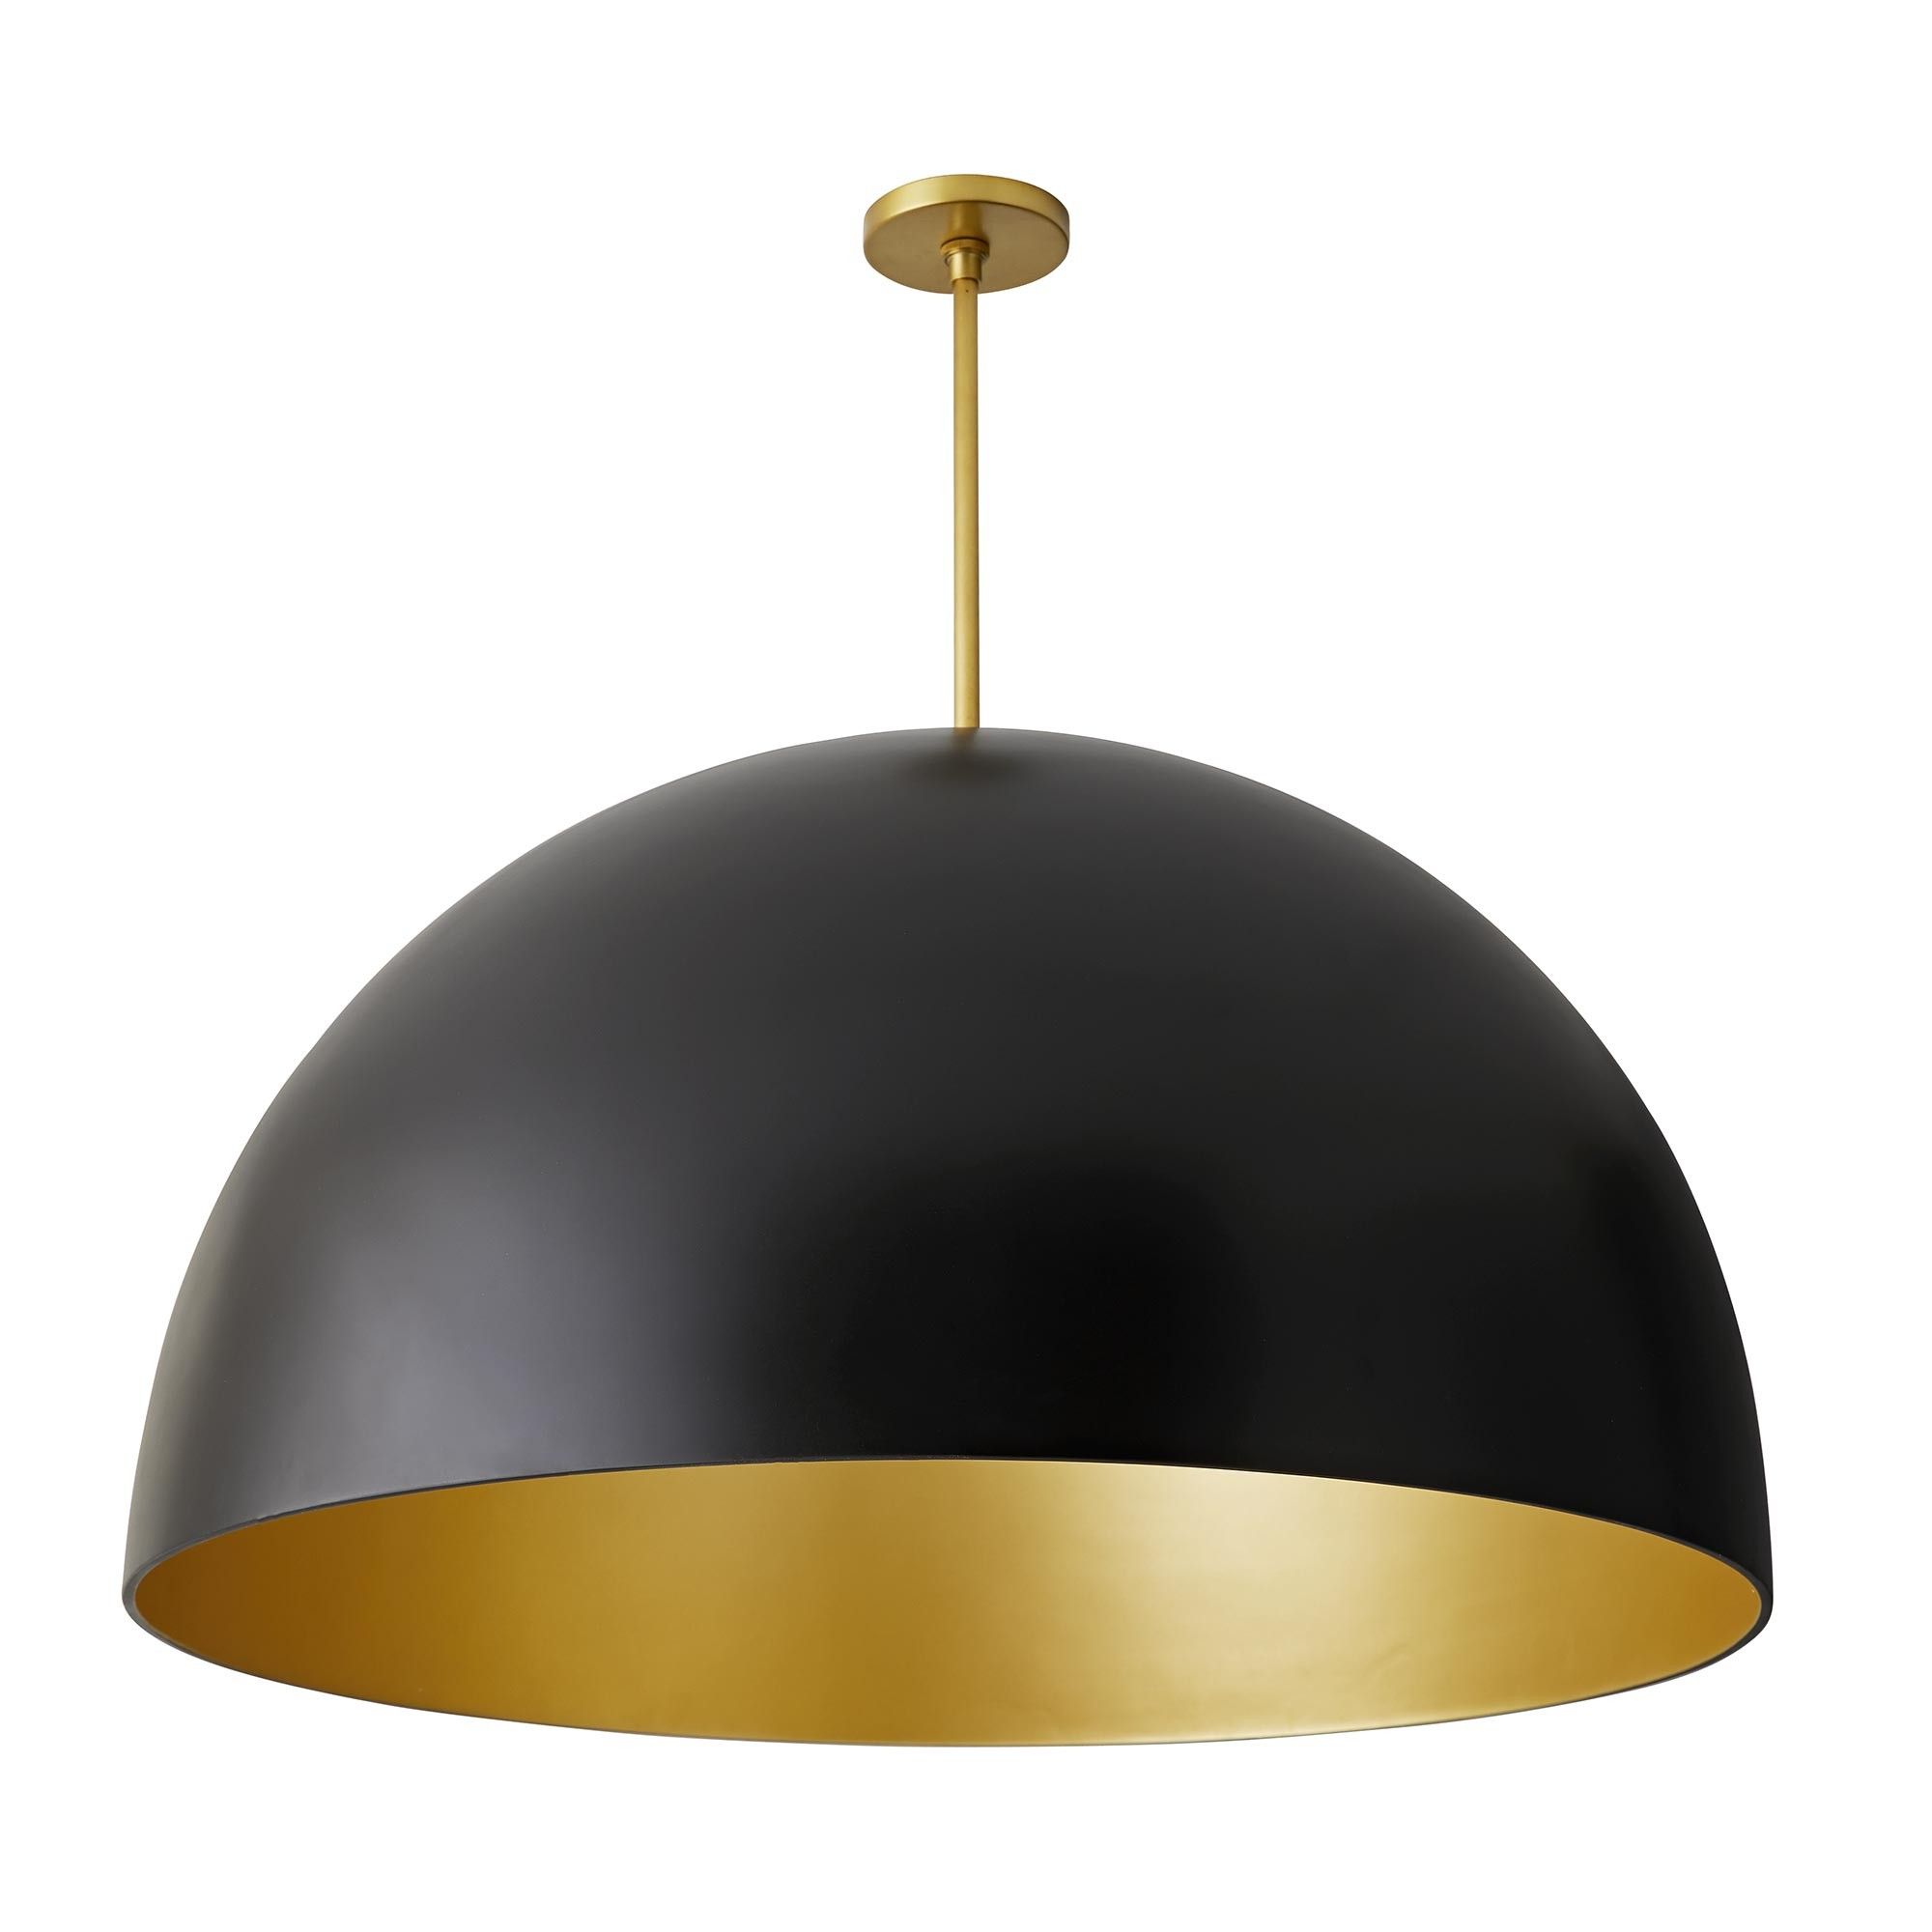 Well Known Matte Black And Gold Pendant – Dome Pendant Light In Matte For Dark Bronze And Mosaic Gold Pendant Lights (View 6 of 20)